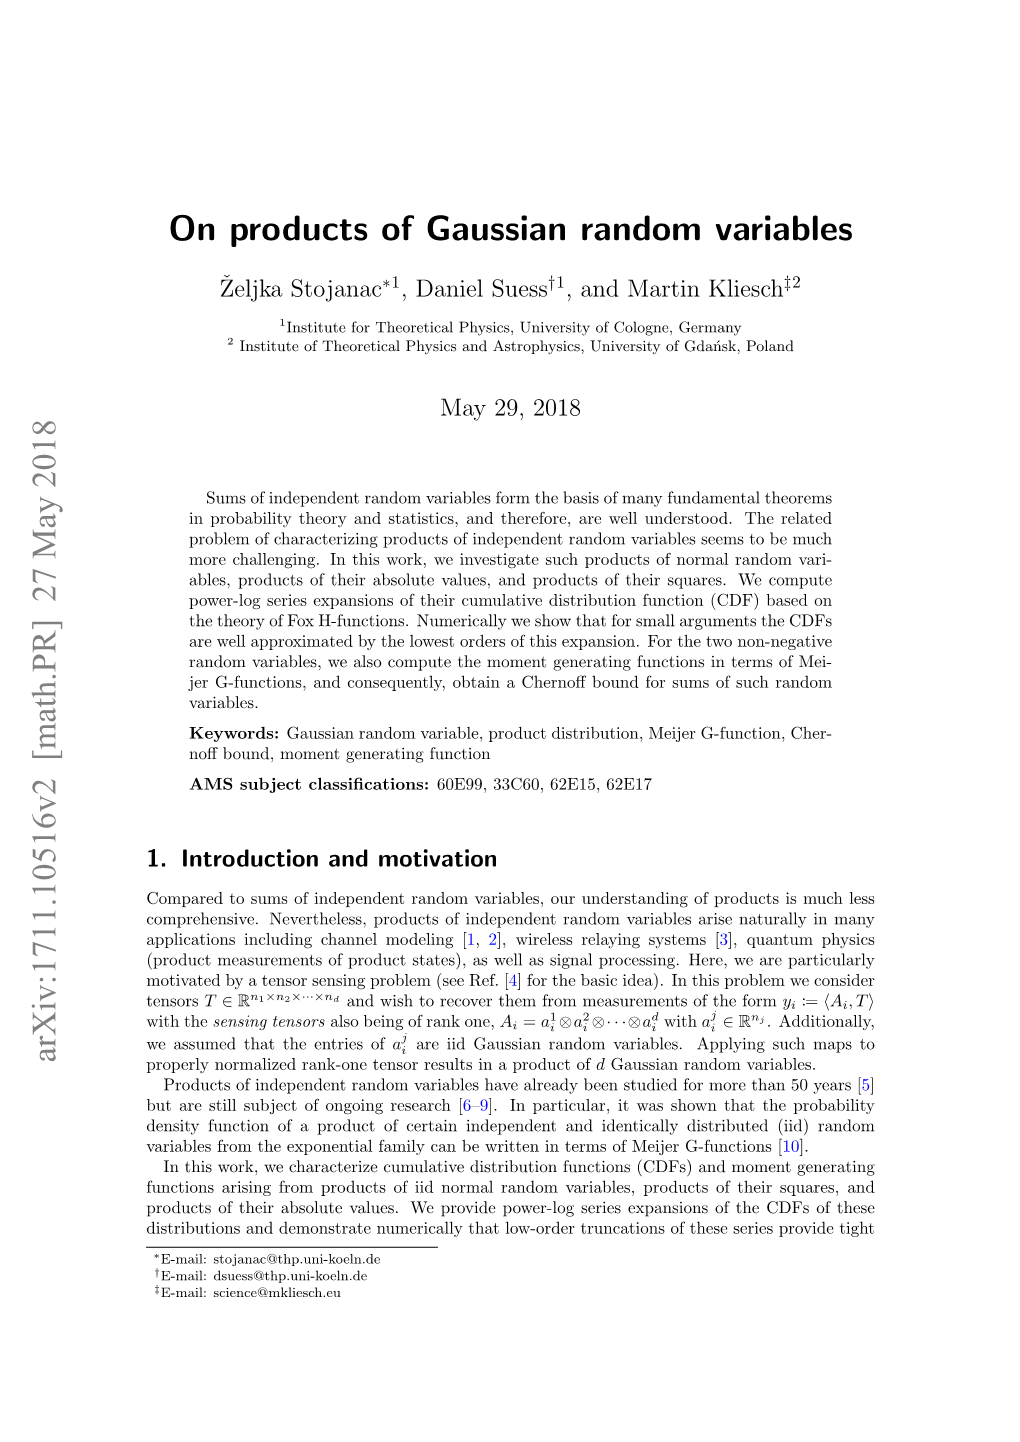 On Products of Gaussian Random Variables